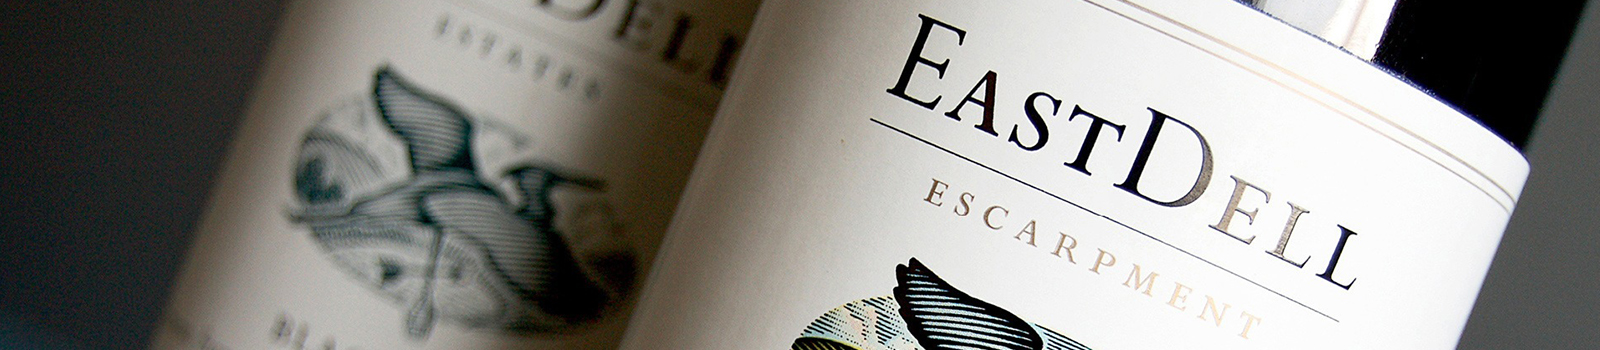 EastDell Wines, Lakeview Wine Co., Trajectory Beverage Partners